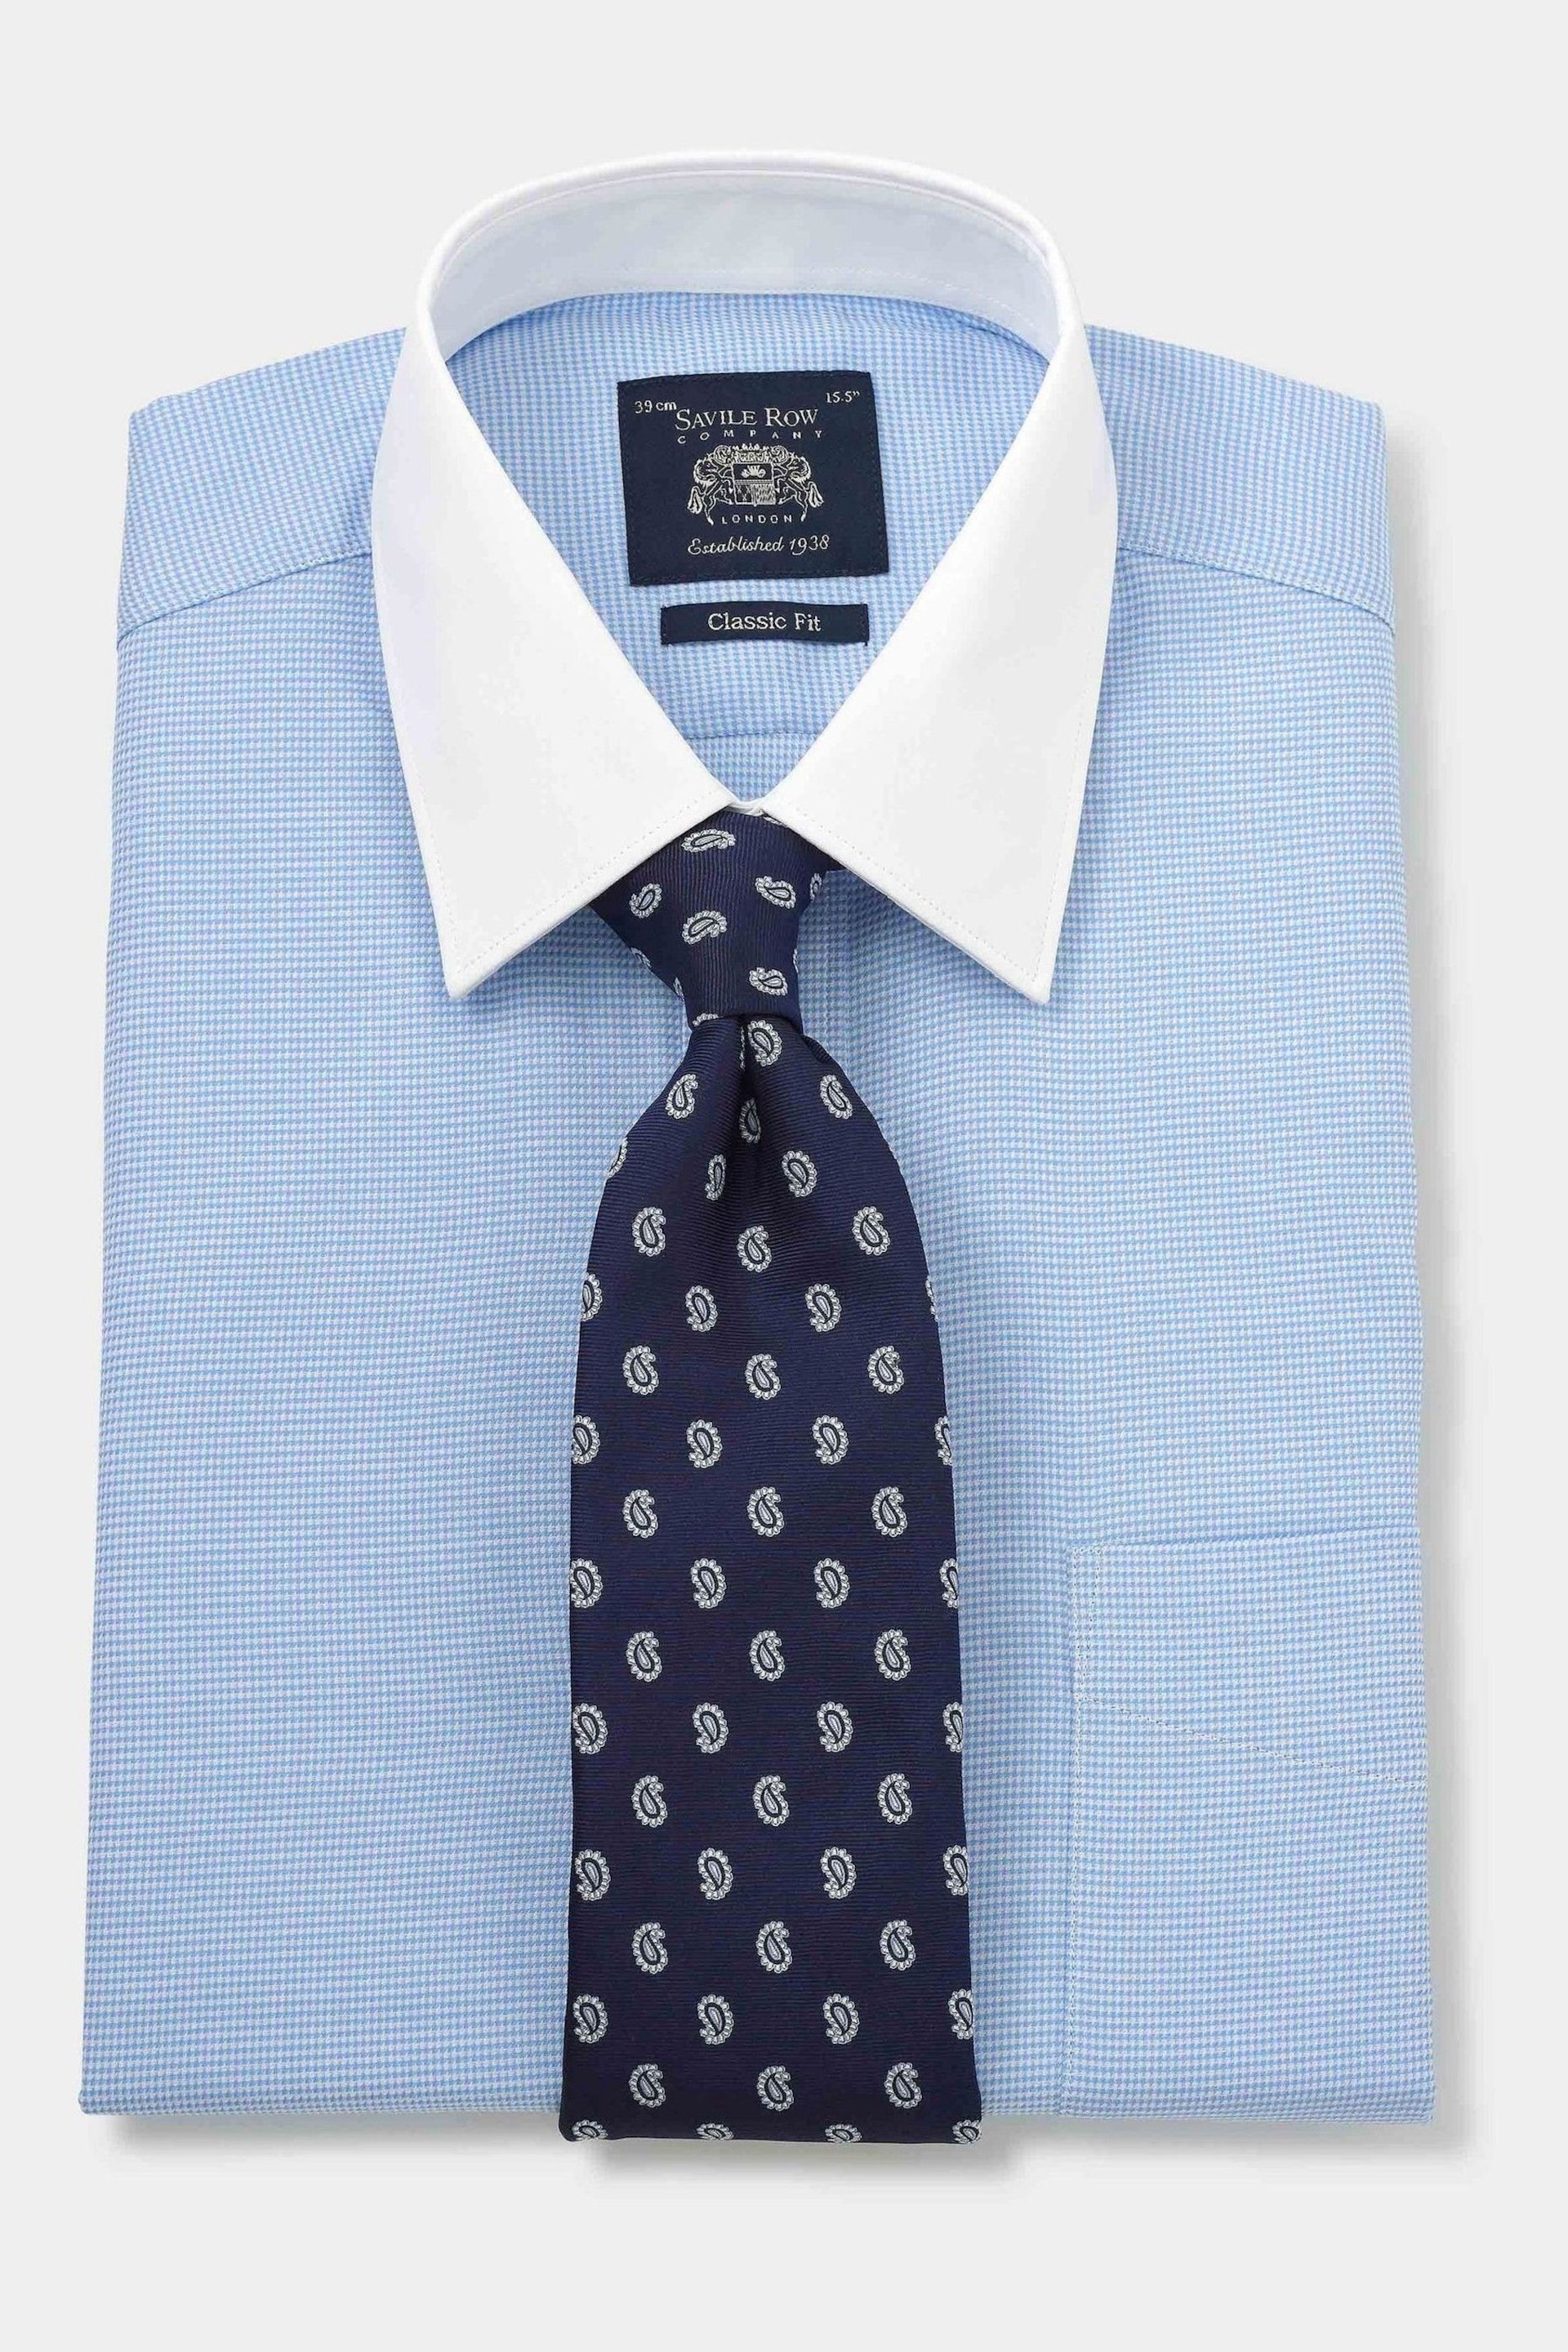 The Savile Row Company Classic Fit Blue Savile Row Blue Puppytooth Double Cuff Shirt - Image 3 of 4